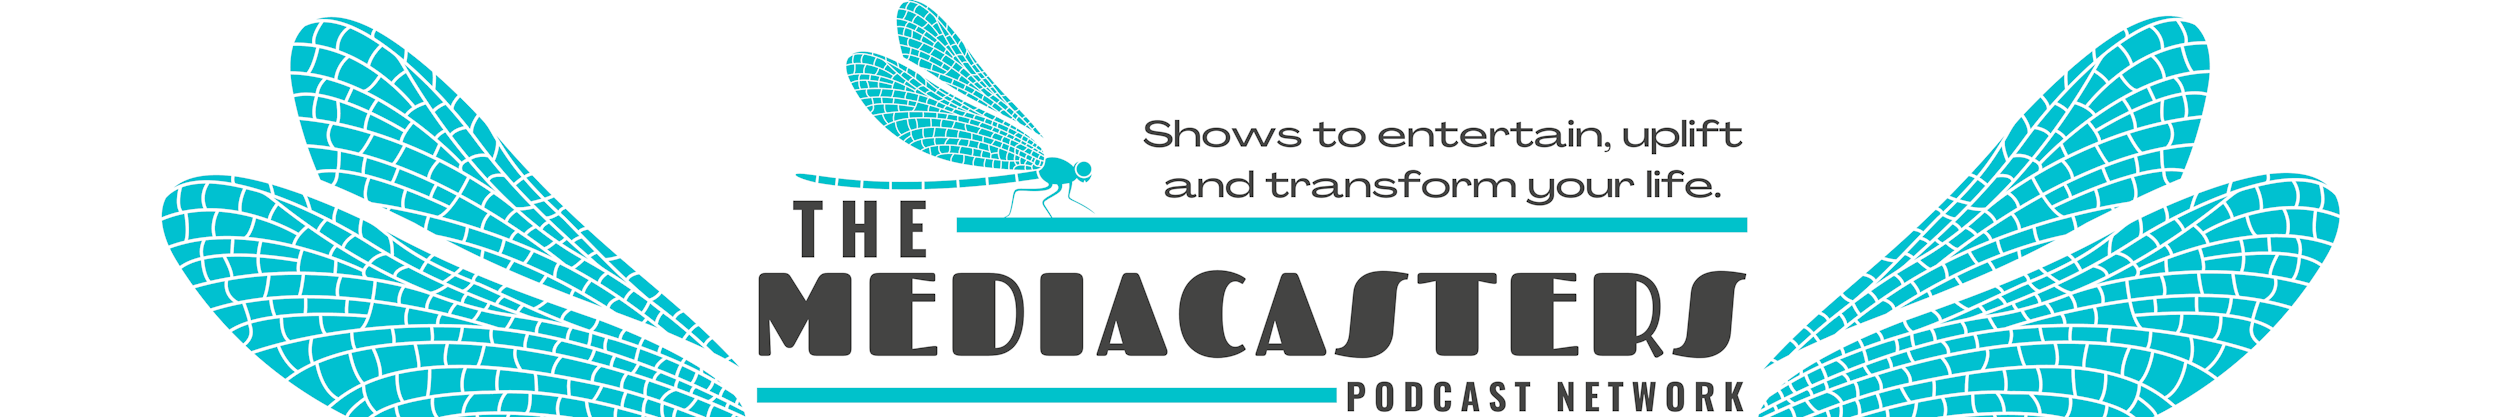 The Mediacasters Podcast Network